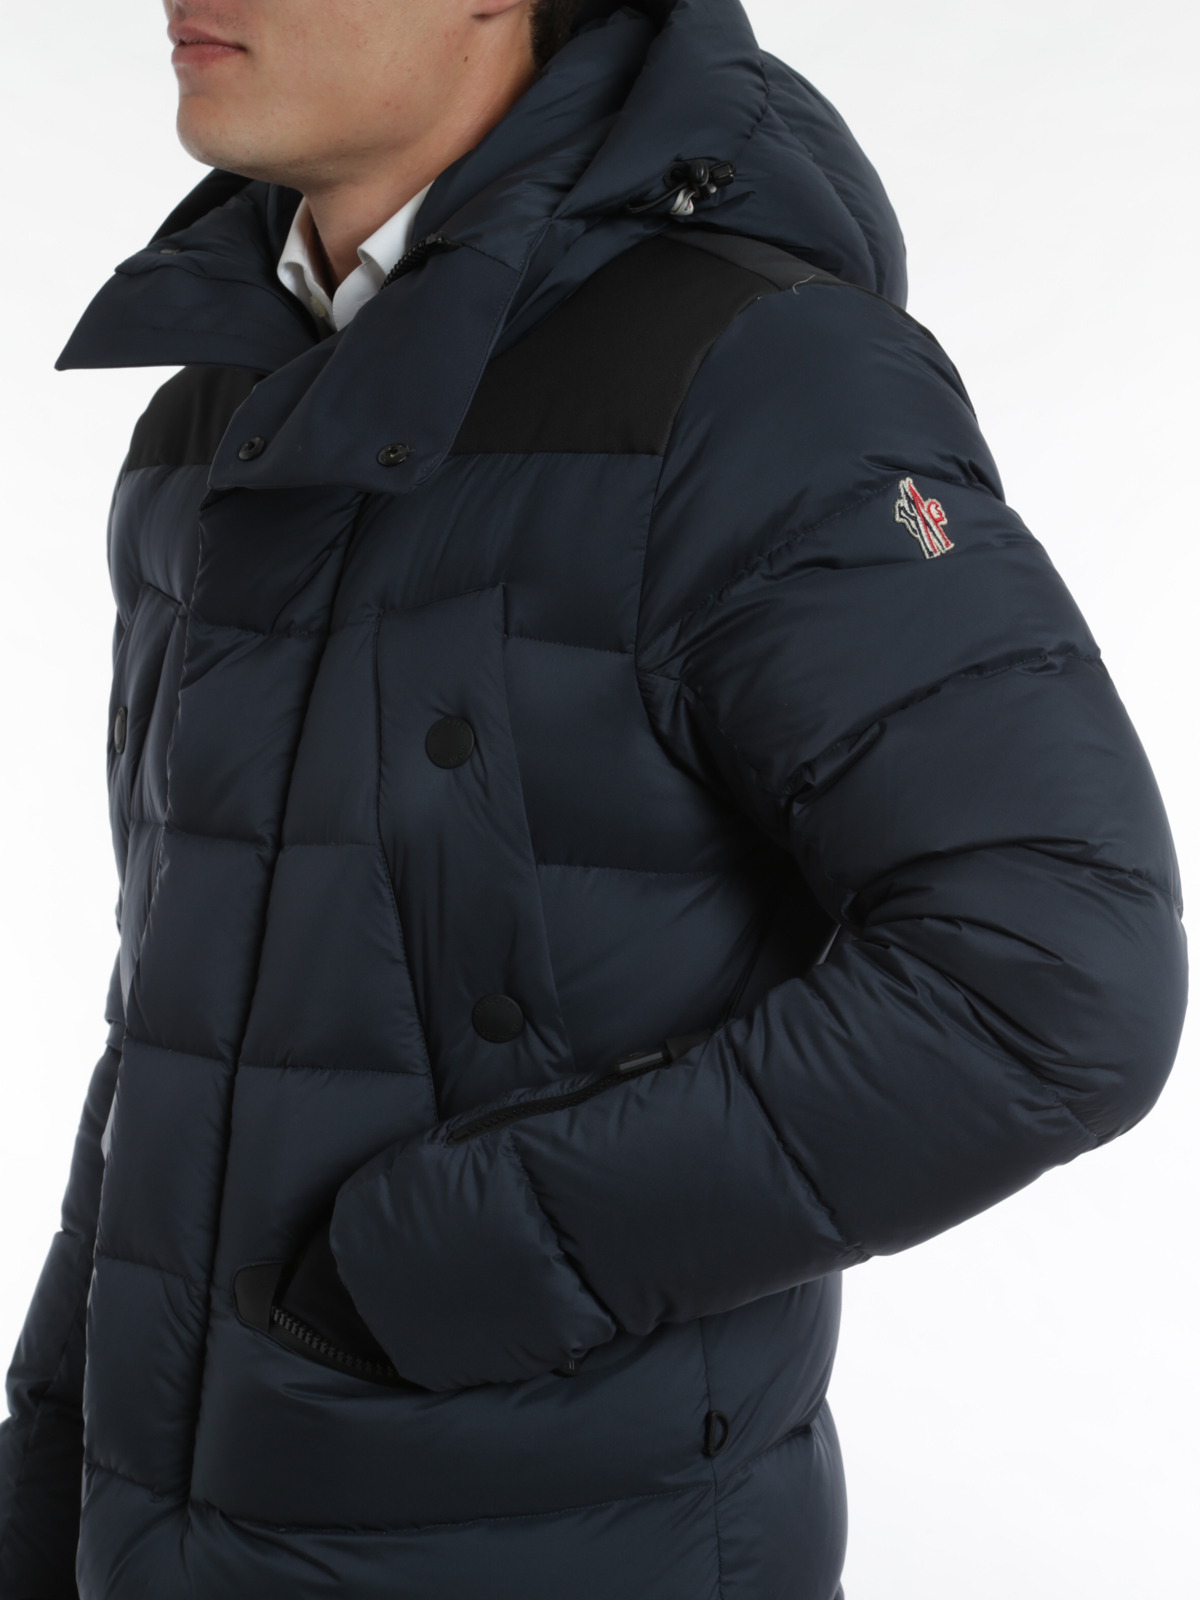 Padded jackets Moncler Grenoble - Anchorage down jacket 